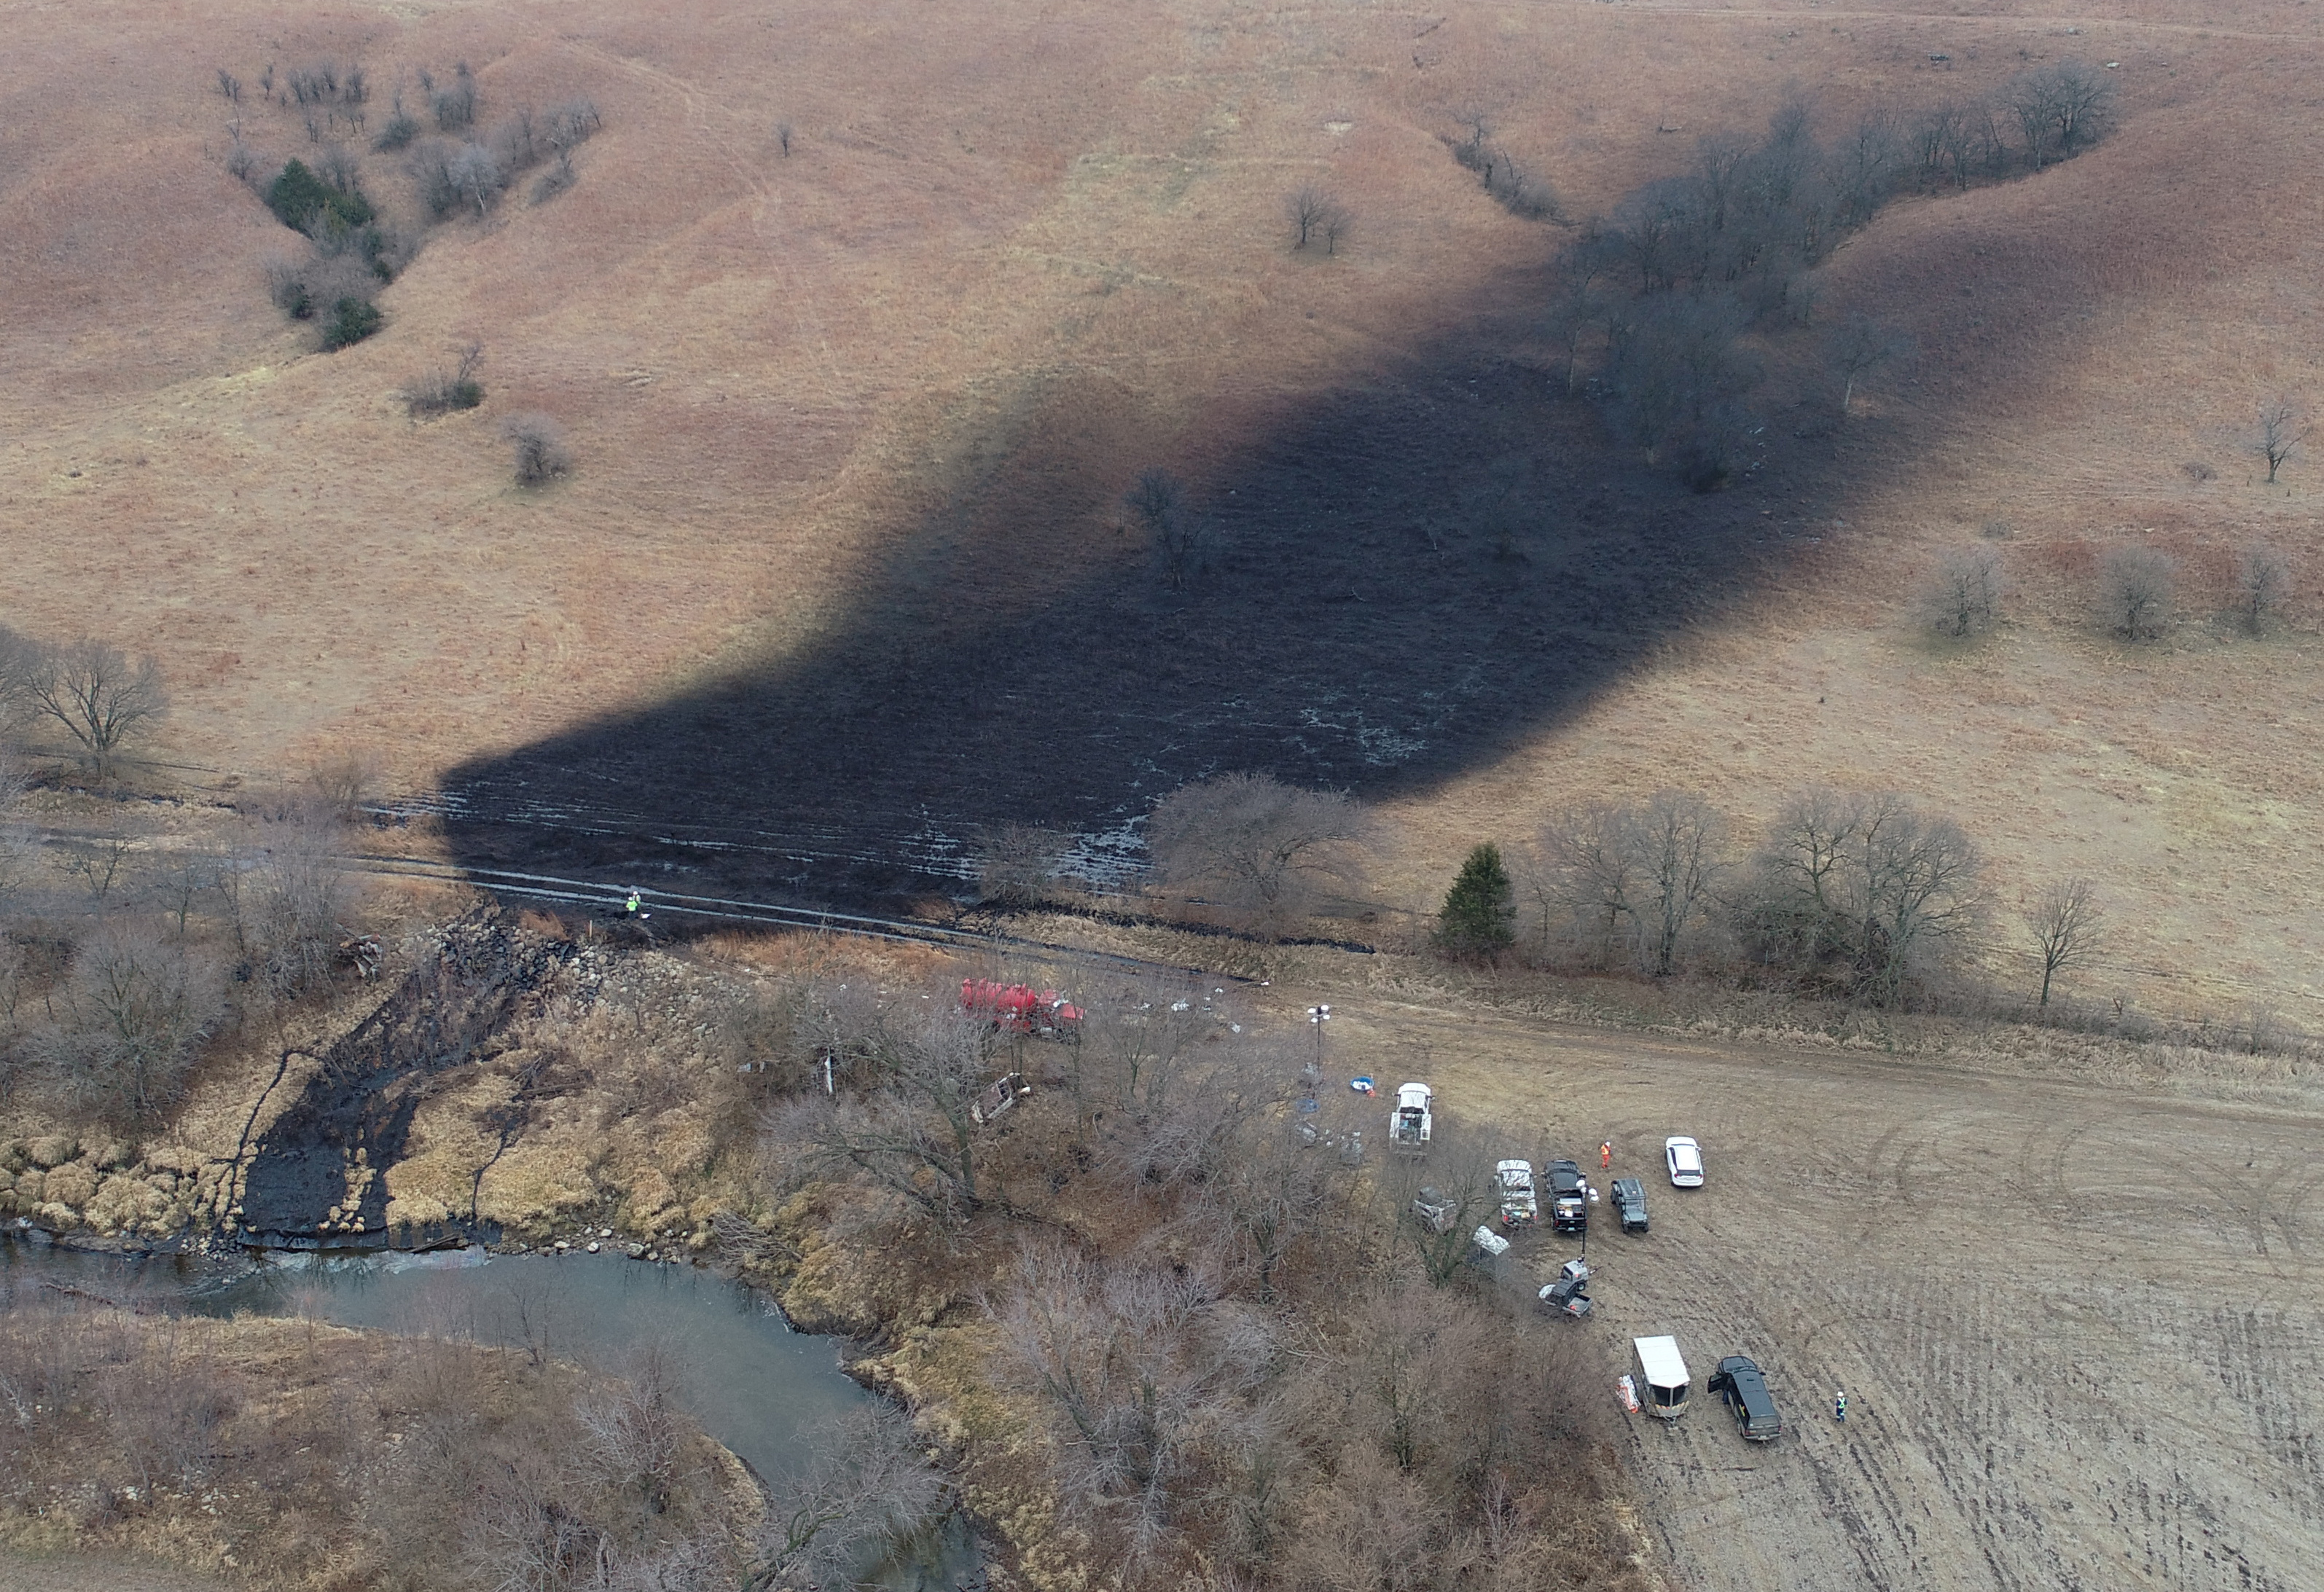 Kansas residents hold their noses as crews mop up massive U.S. oil spill |  Reuters